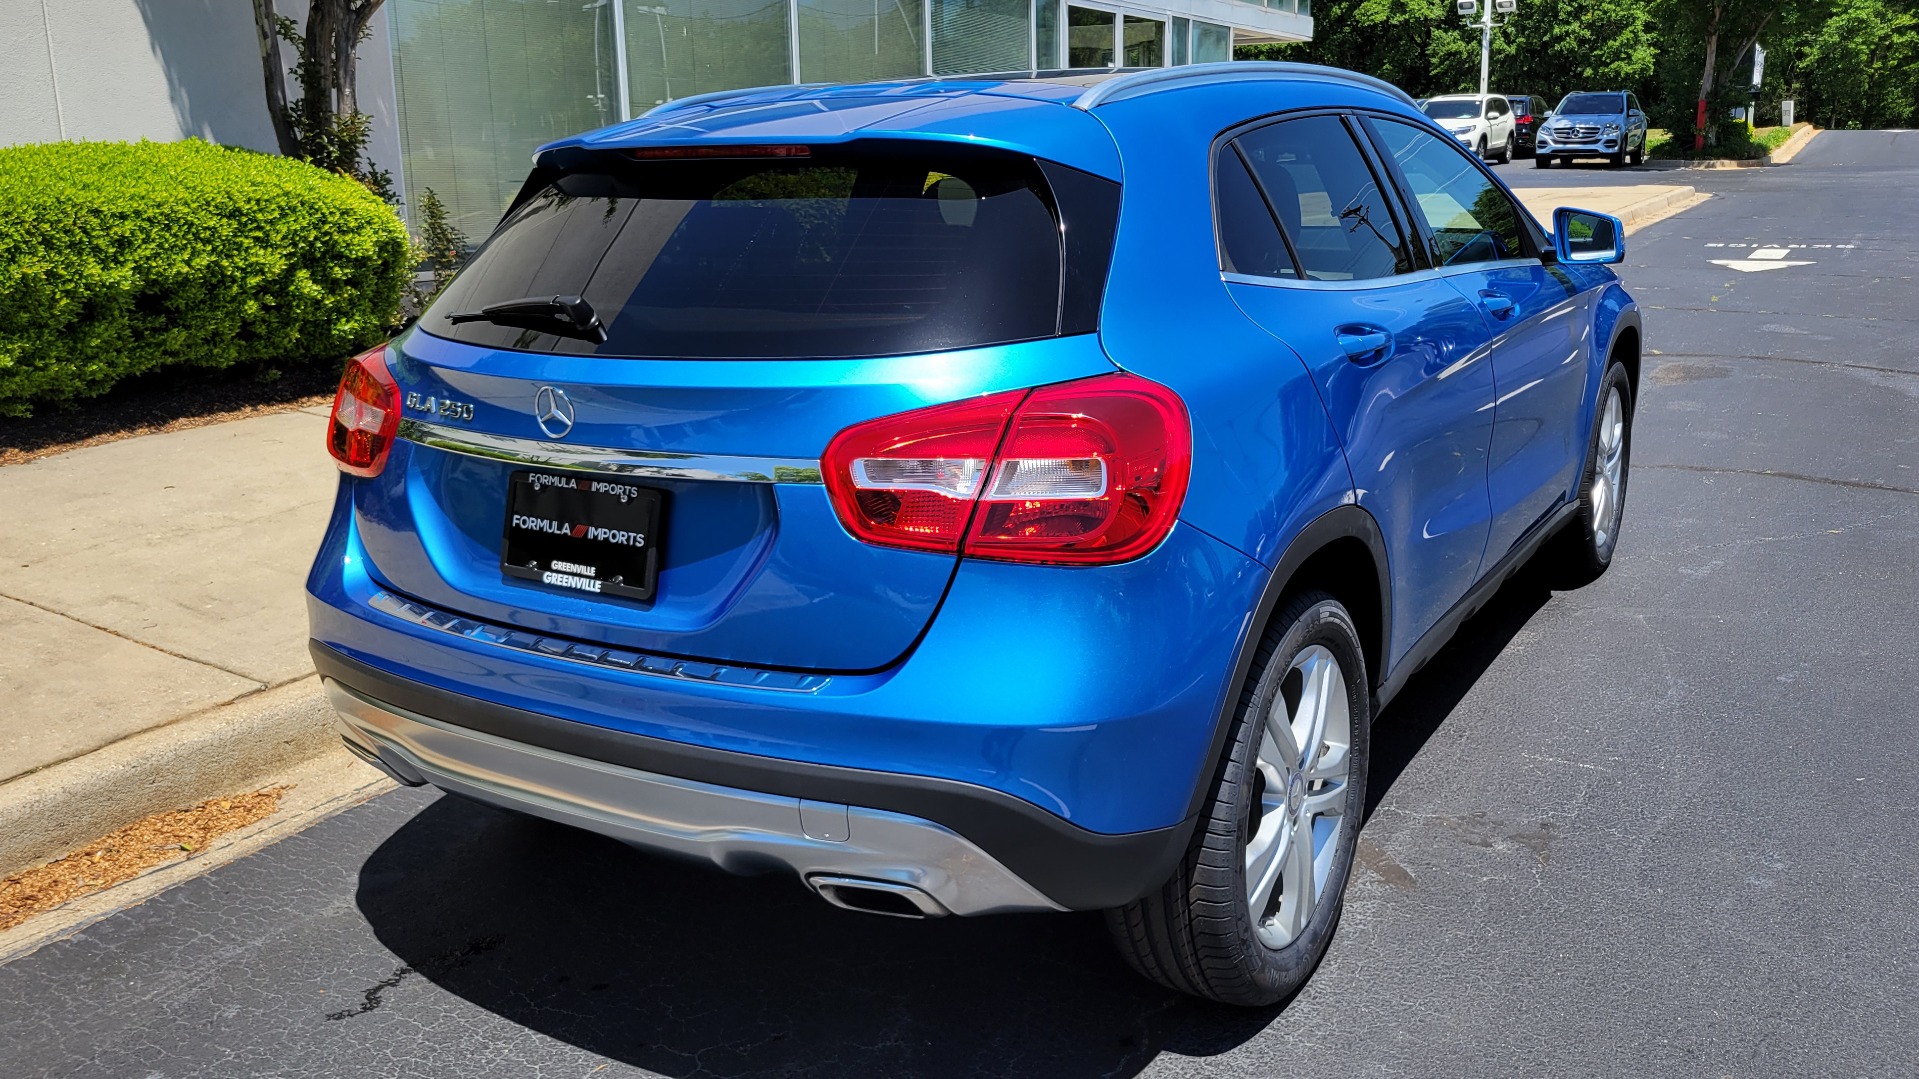 Used 2017 Mercedes-Benz GLA 250 2.0L SUV / PANO-ROOF / BLIND SPOT ASST / REARVIEW for sale $27,595 at Formula Imports in Charlotte NC 28227 5